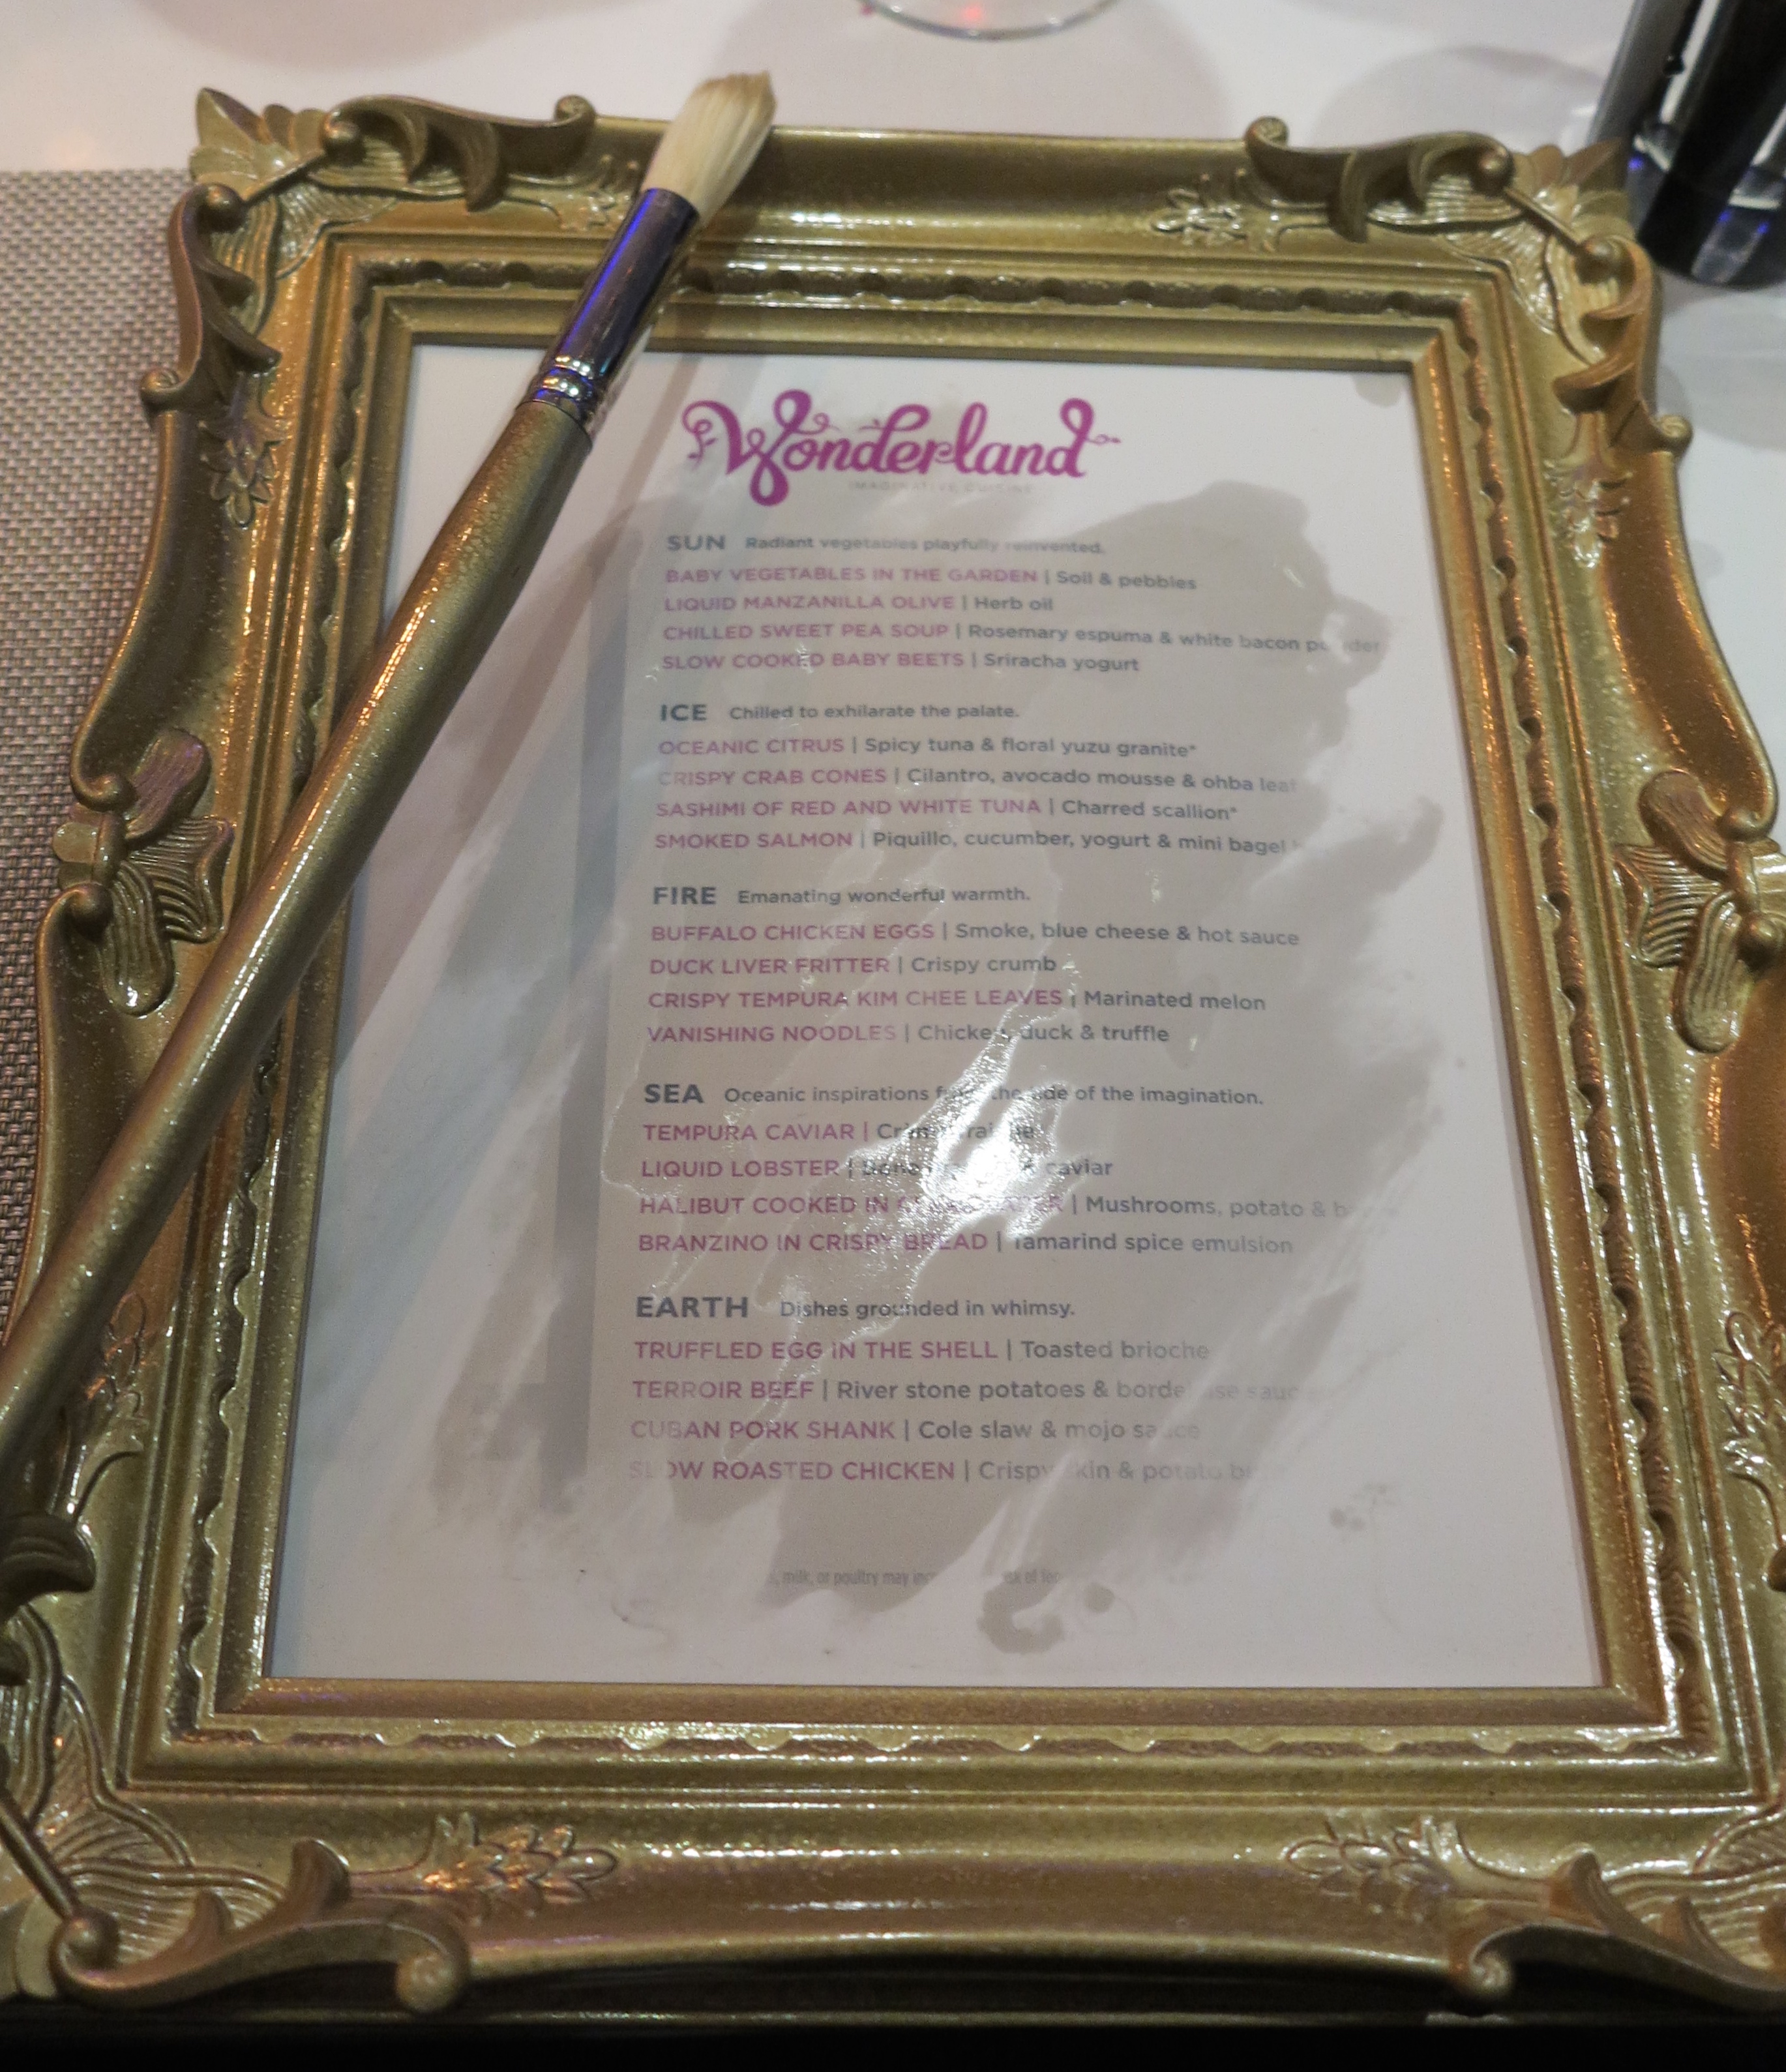 Taste of what's to come: It takes a bit of magic (well, a paint brush and water) to make the Wonderland menu appear